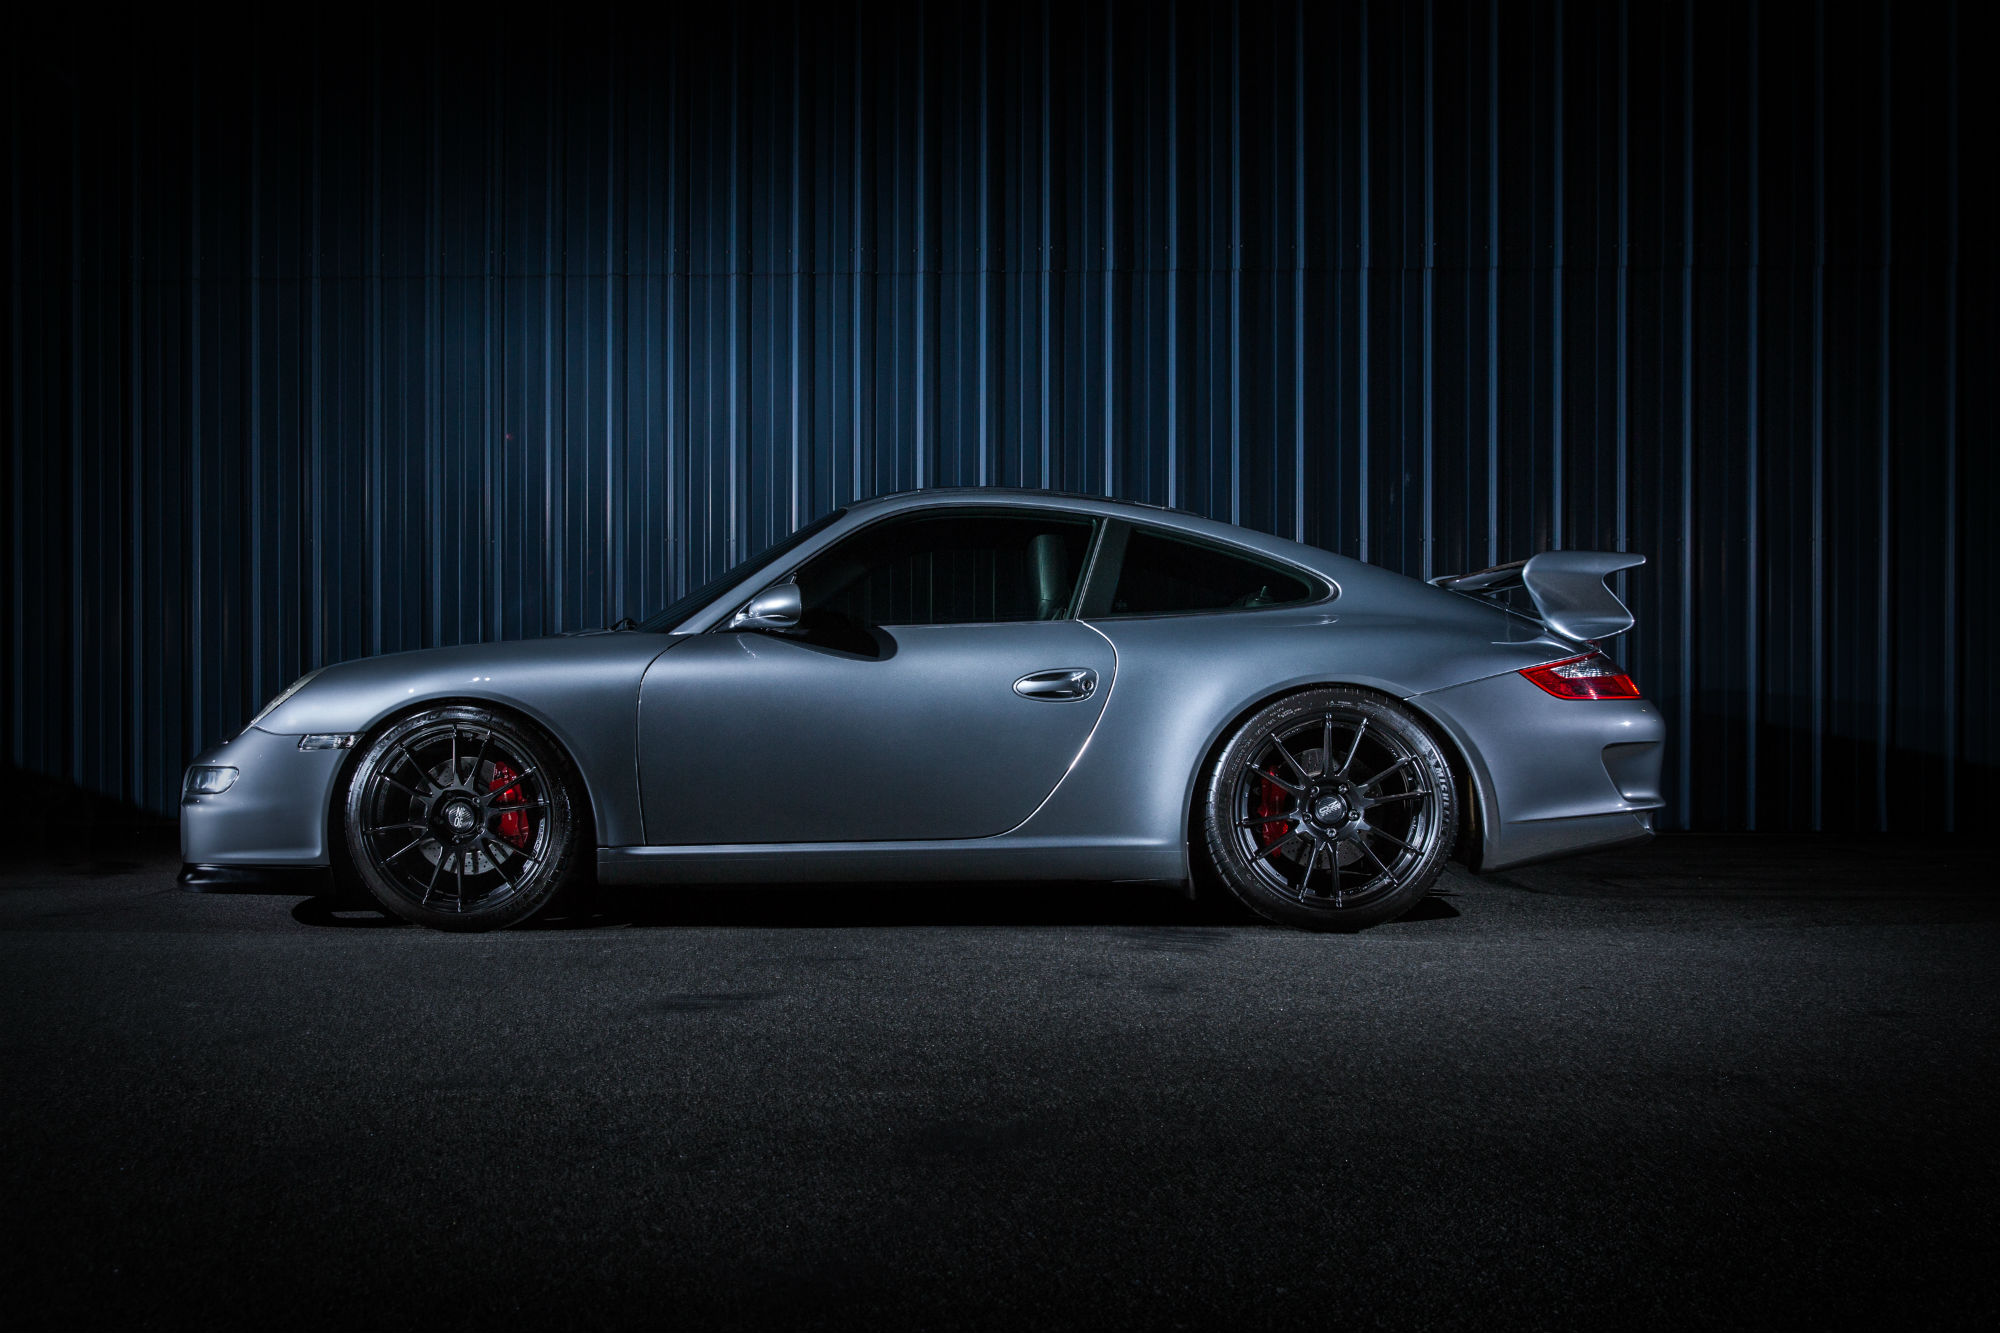 How to Get the Most Out of Your Porsche Photos